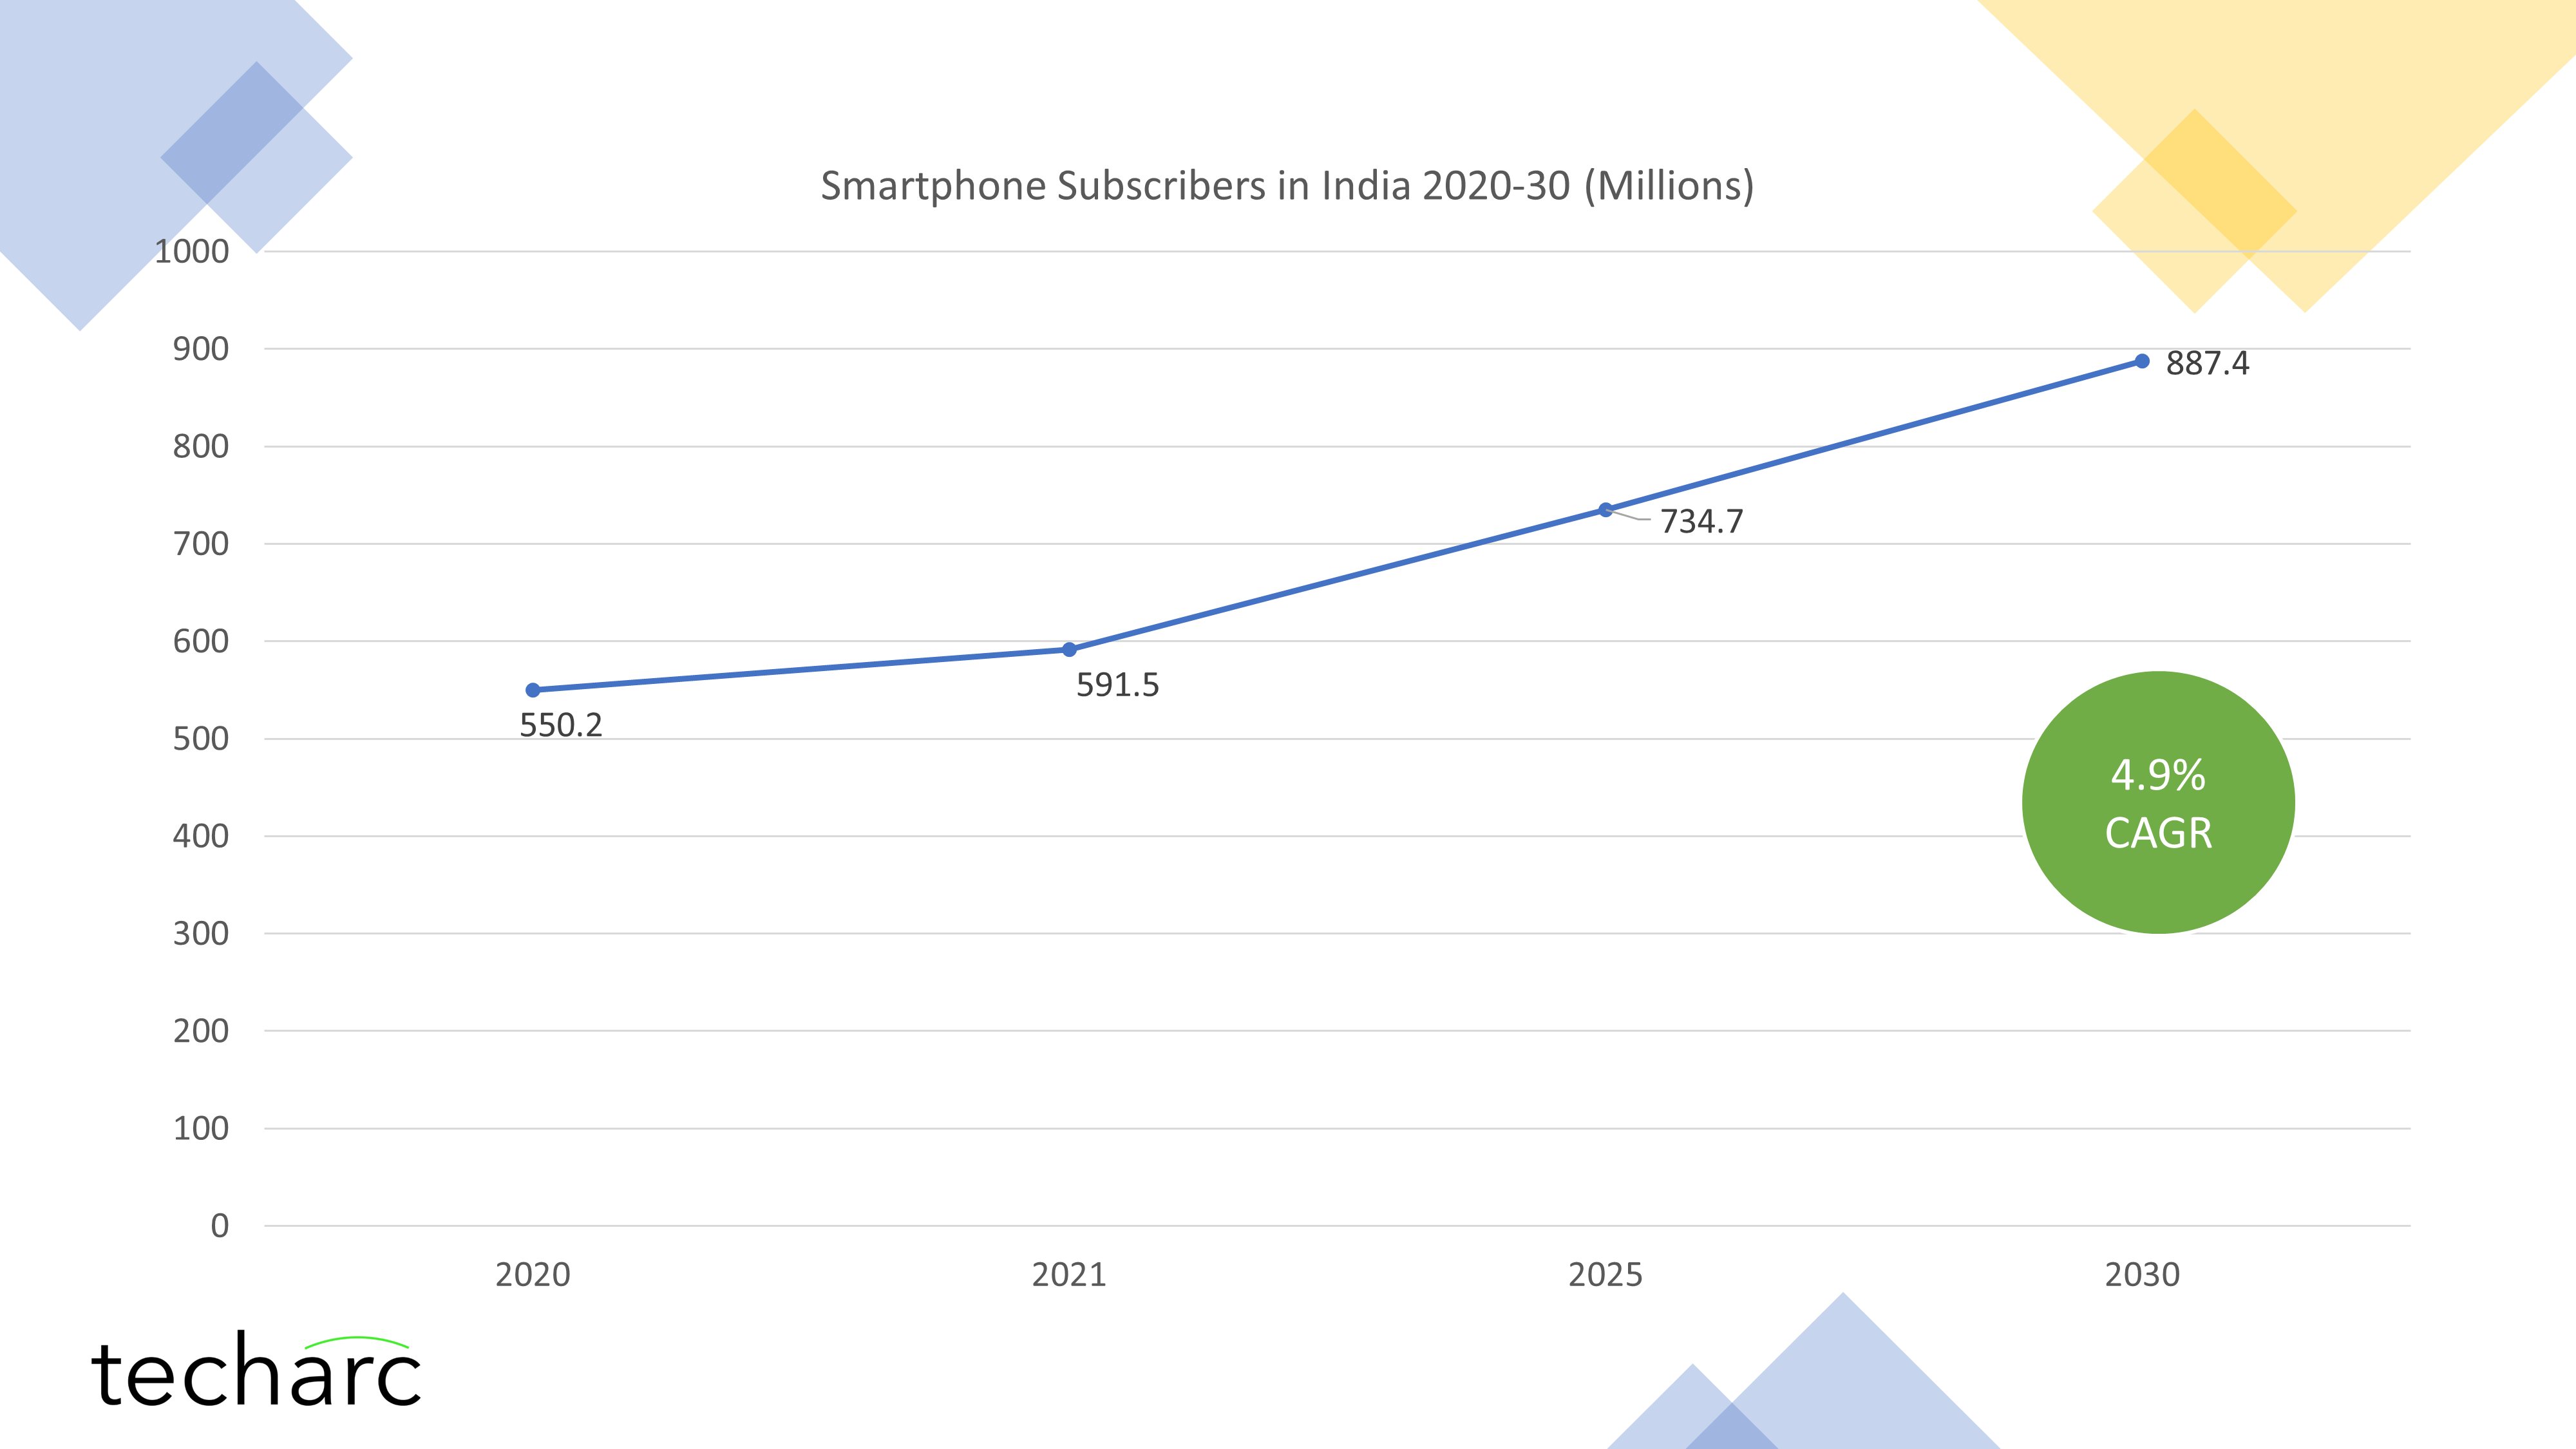 At 4.9% CAGR for smartphone subscriber growth in 2020-30 decade, India may not have a billion smartphone users even by 2030